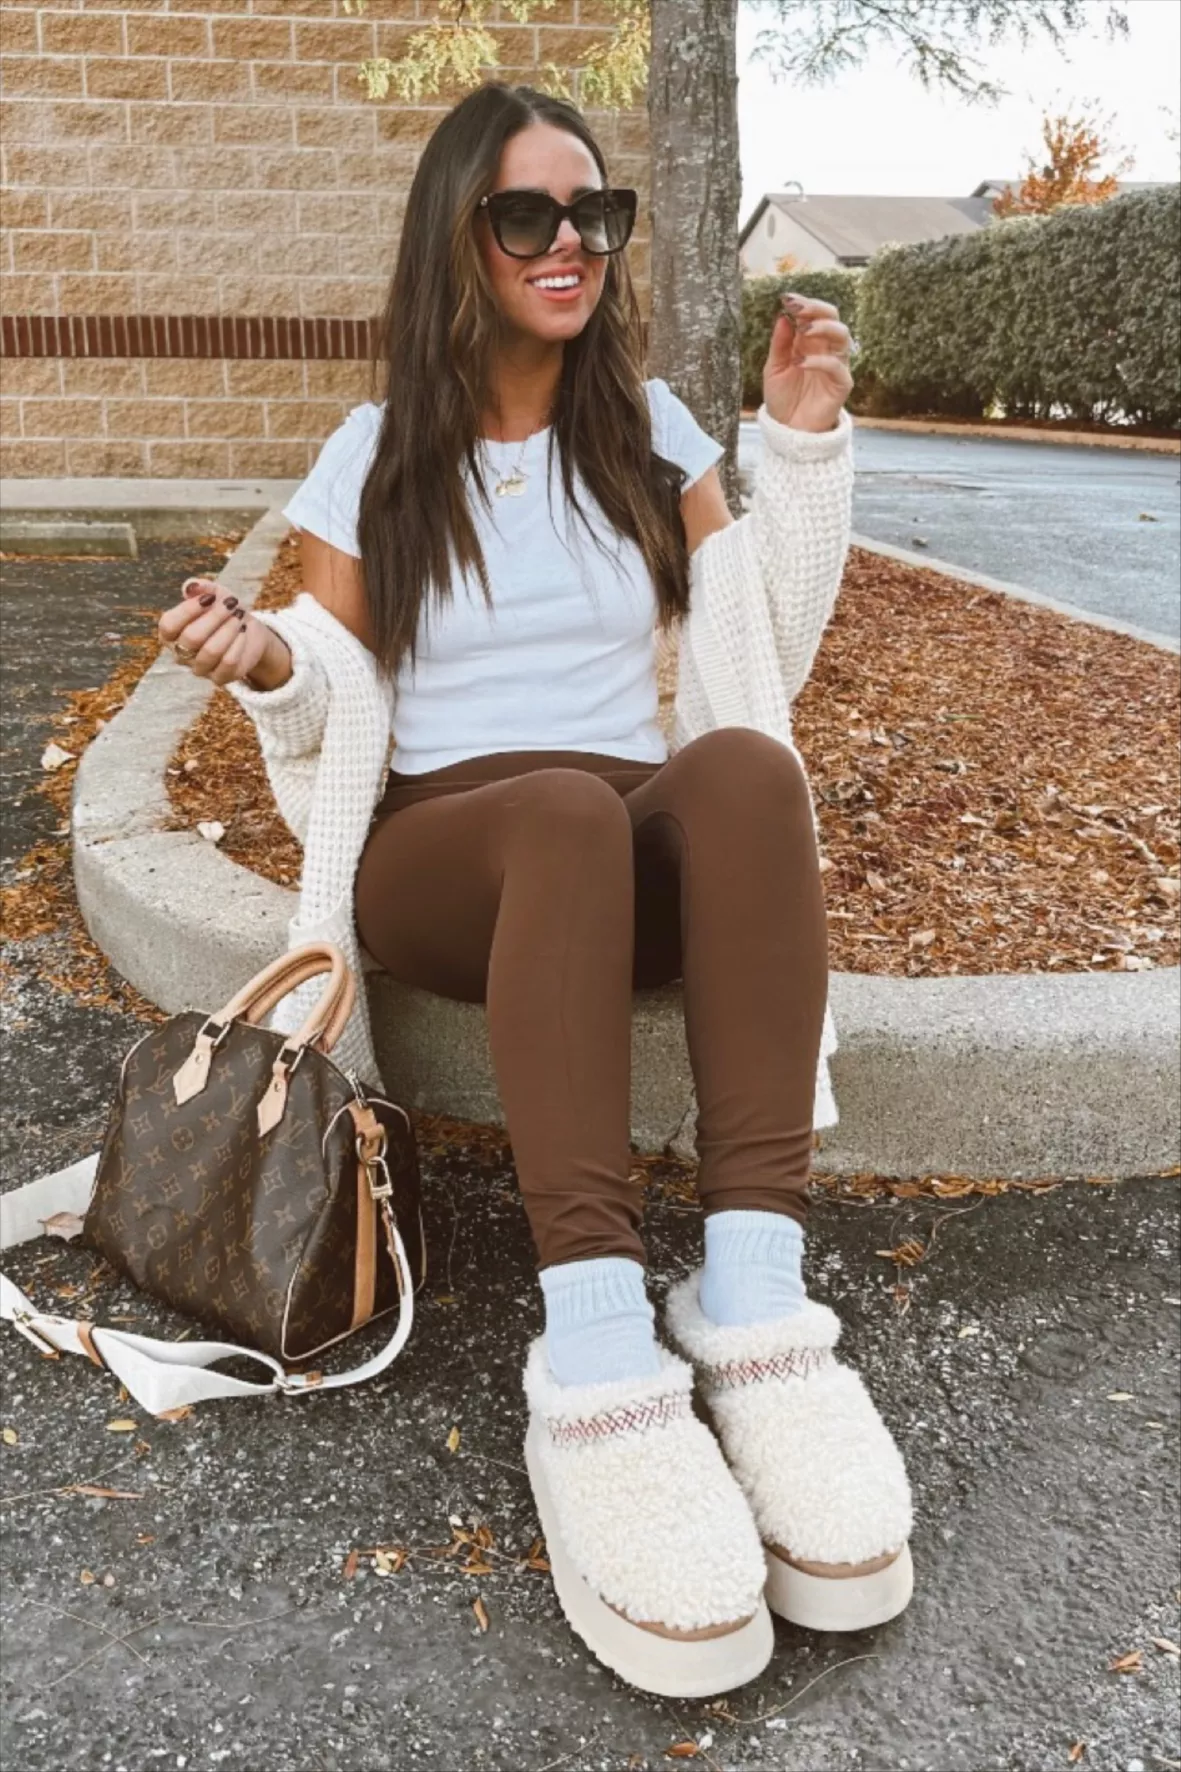 Beige Uggs with Leggings Relaxed Fall Outfits (3 ideas & outfits